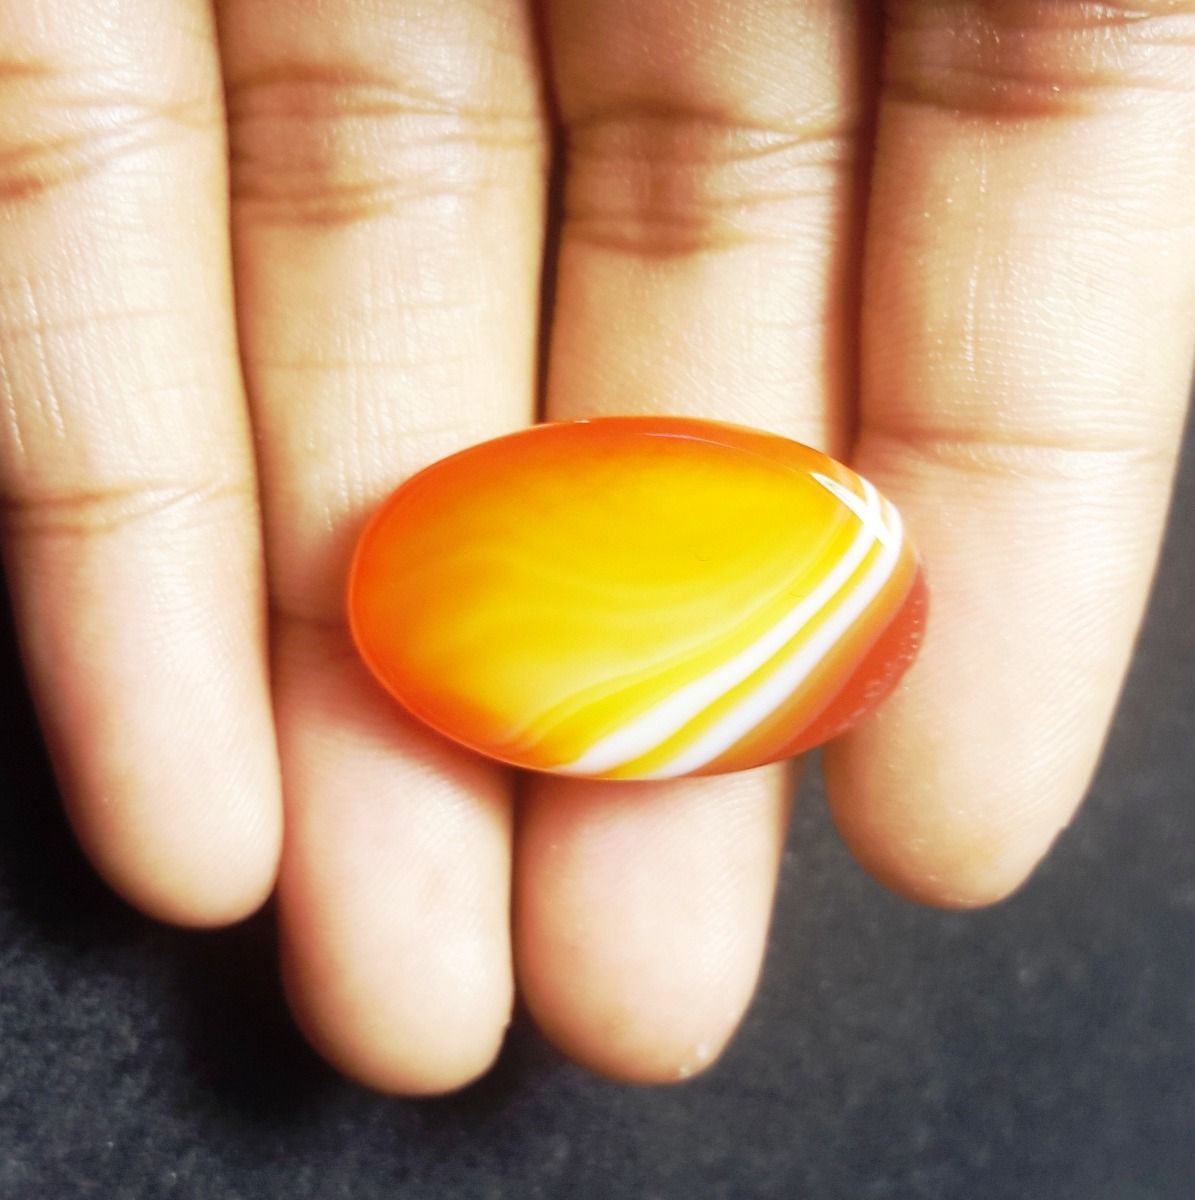 33.85 carat Natural Banded Agate 36.19 x 19.02 x 6.25 mm